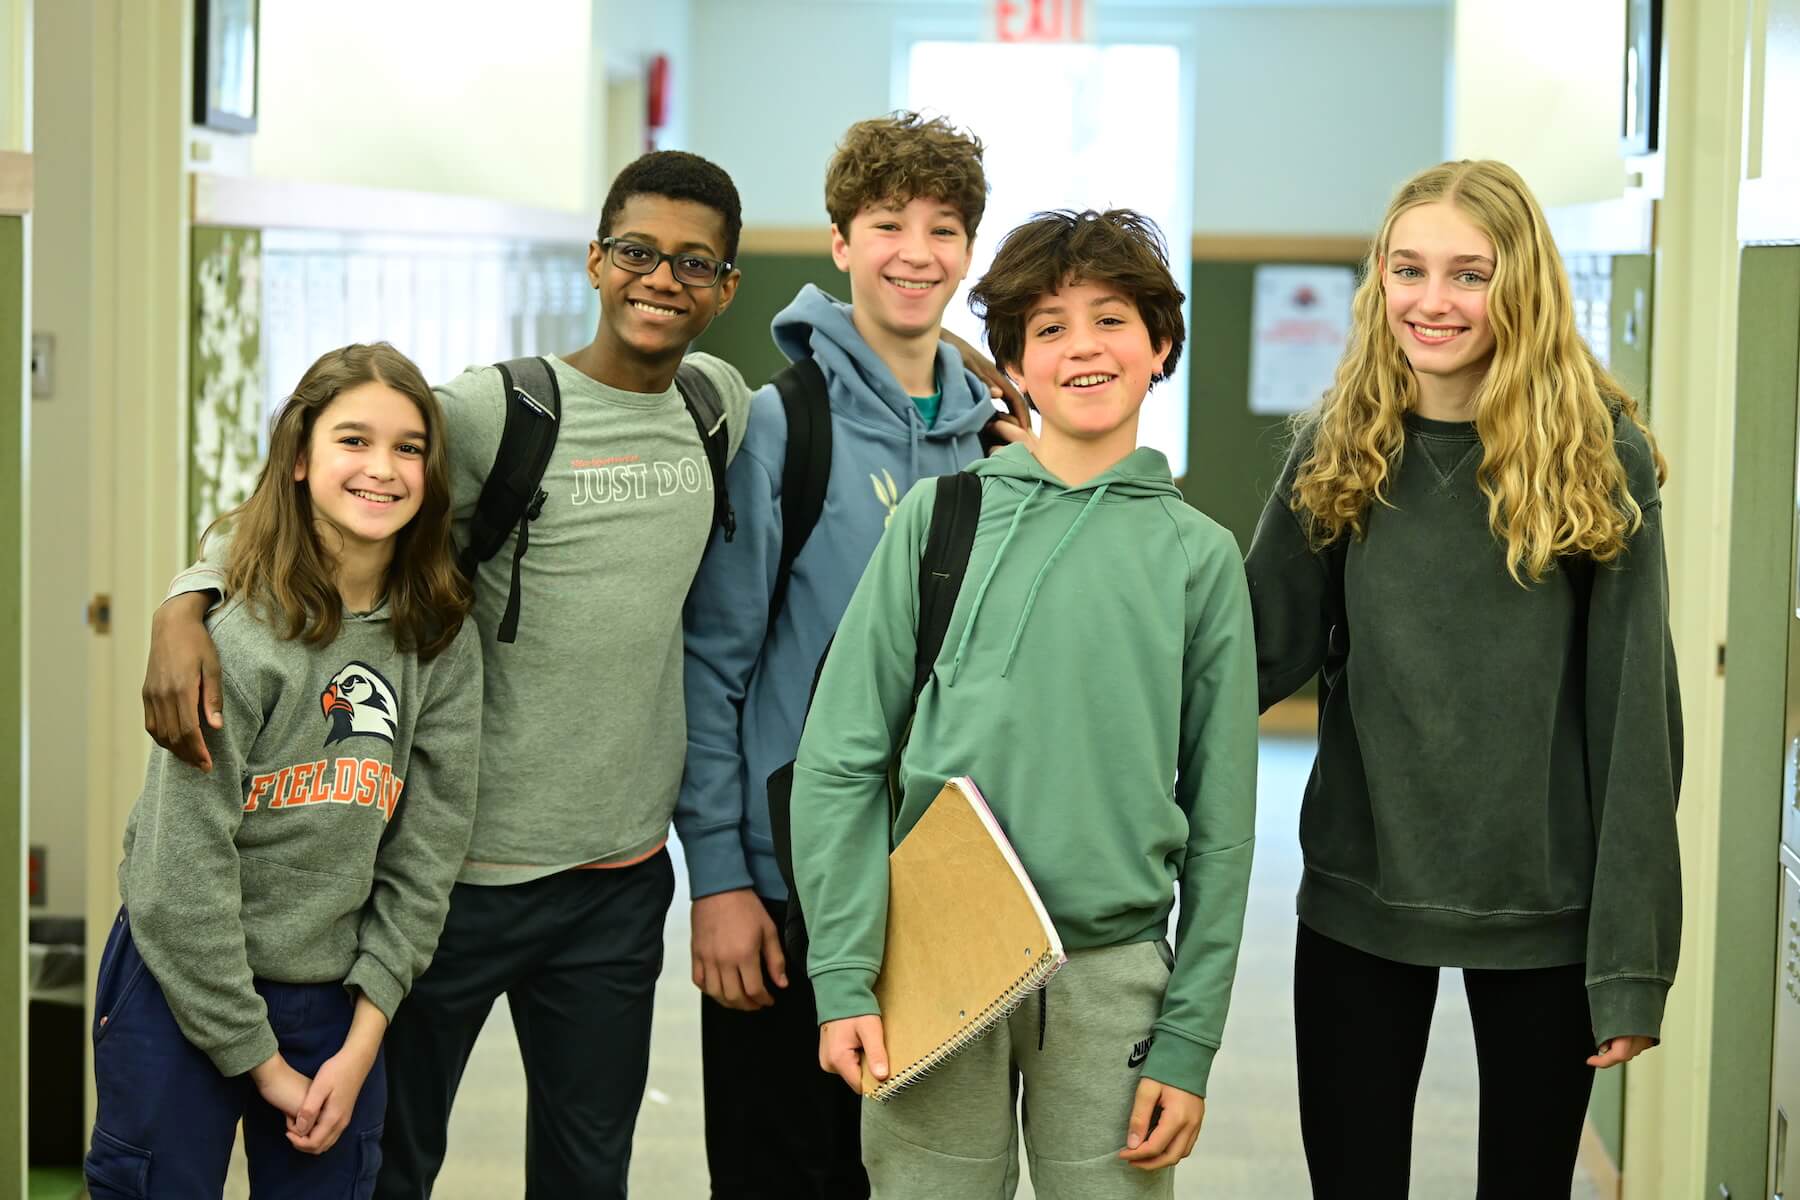 Ethical Culture Fieldston School Fieldston Fieldston Middle students stand together in hall smiling